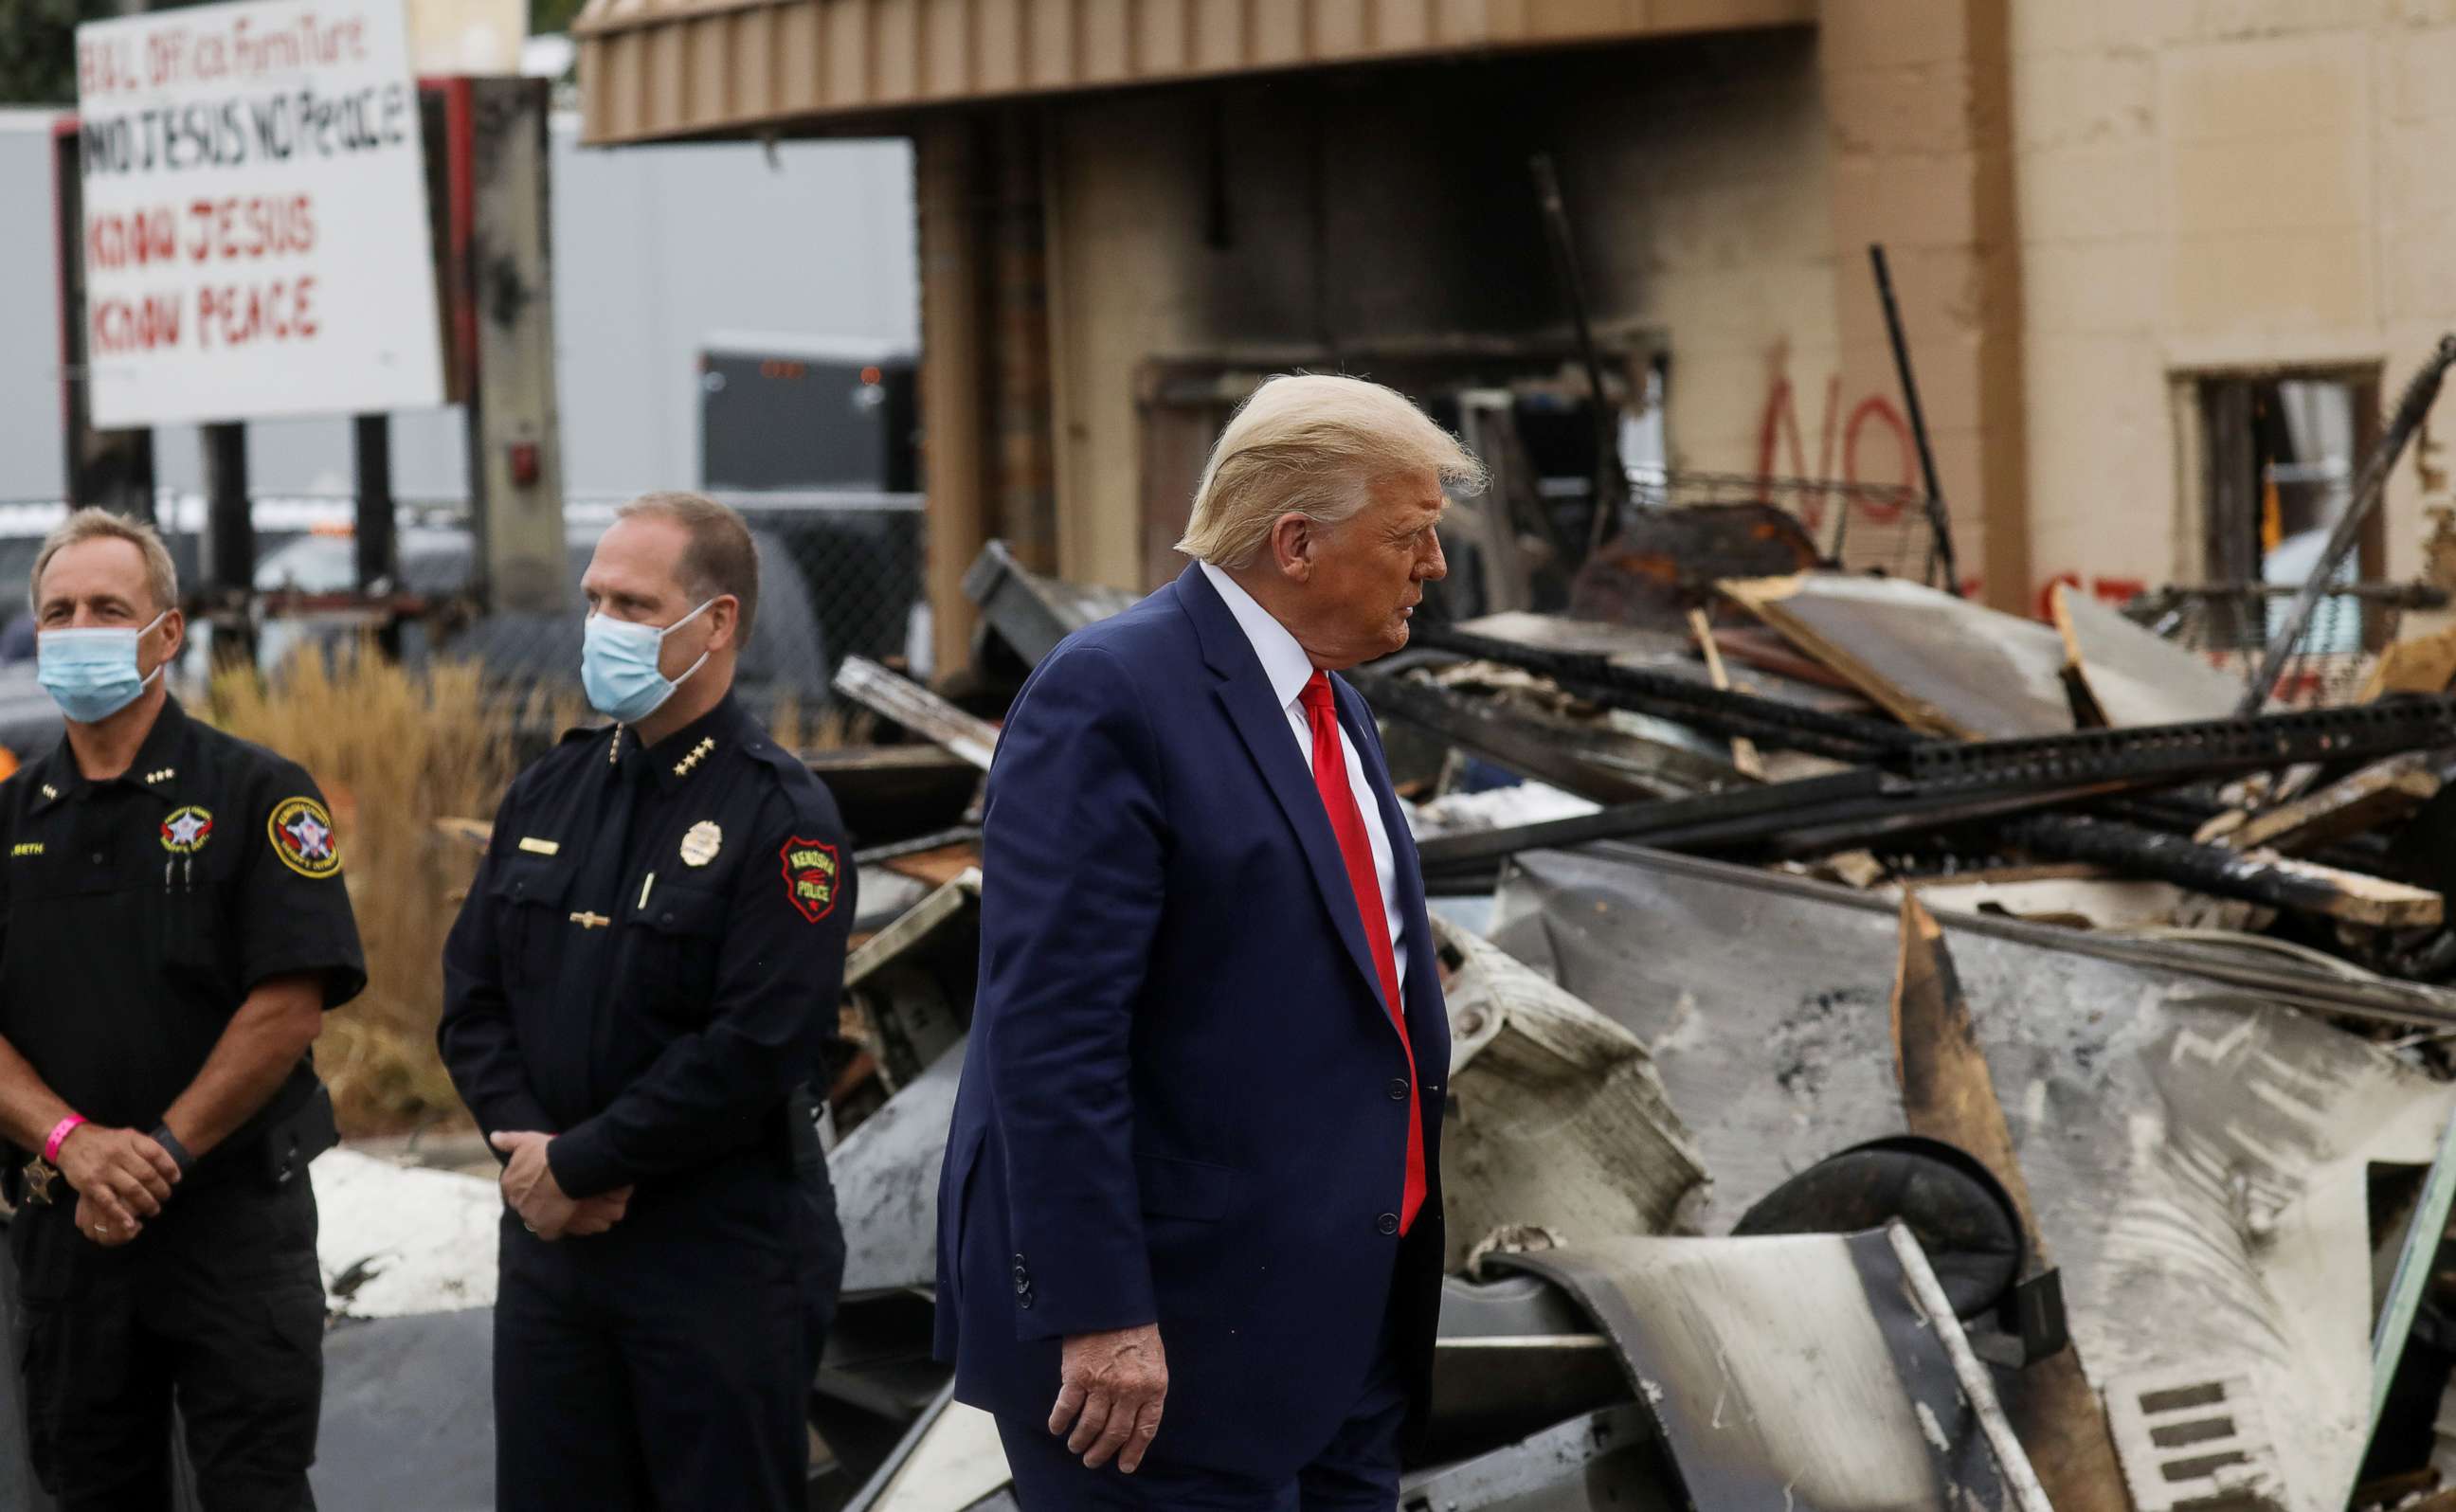 PHOTO: President Donald Trump views property damage during a visit in the aftermath of recent protests against police brutality and racial injustice in Kenosha, Wisconsin, Sept. 1, 2020.